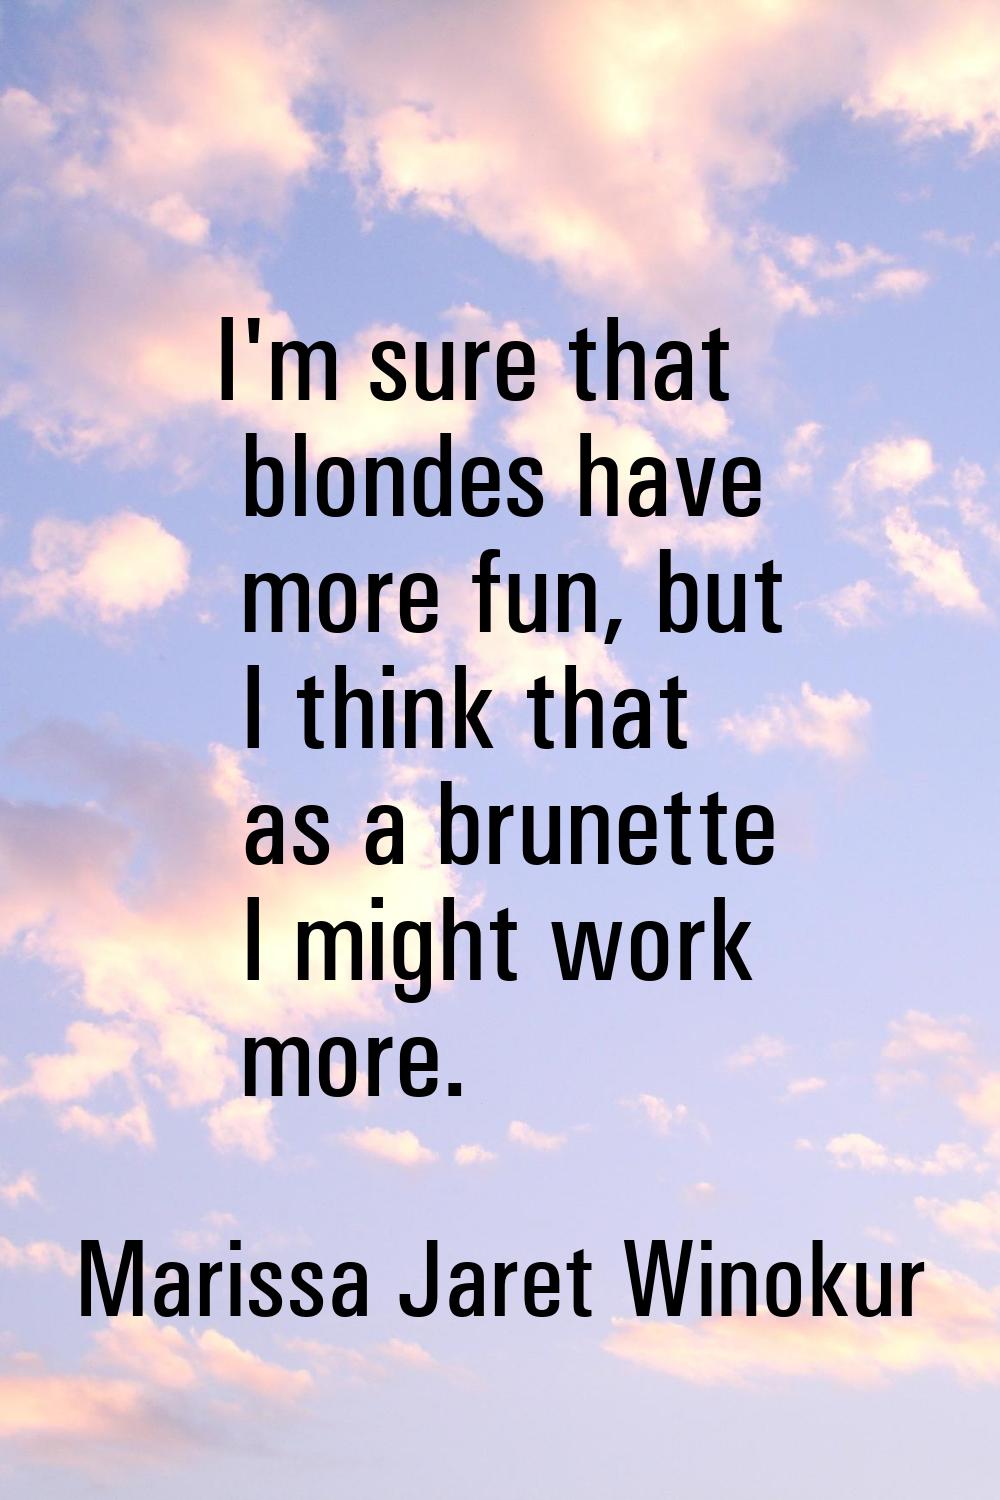 I'm sure that blondes have more fun, but I think that as a brunette I might work more.